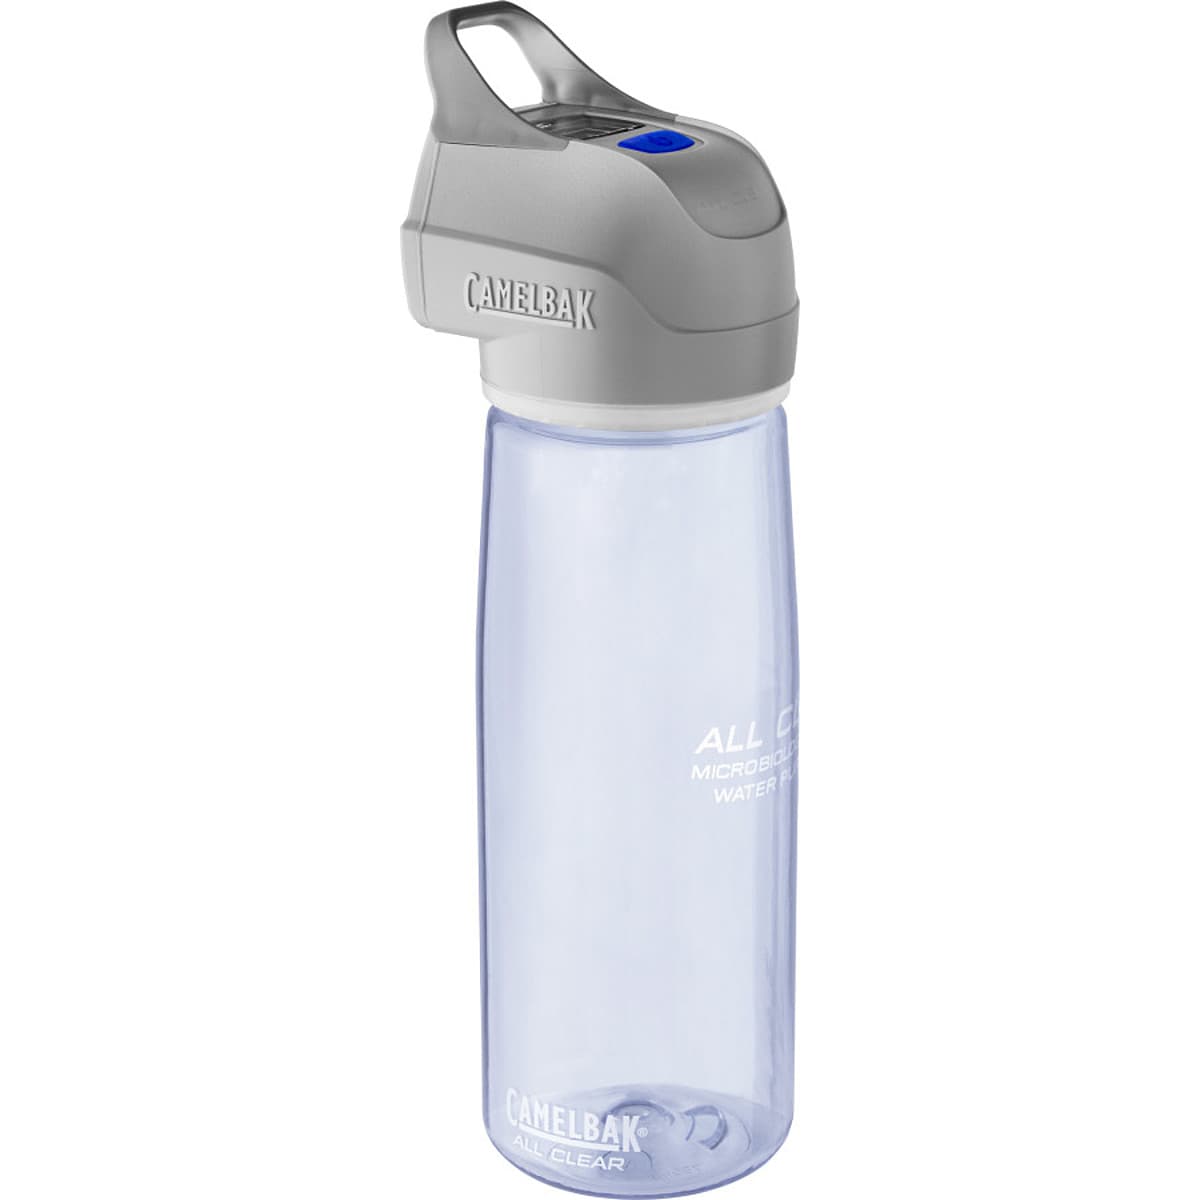 CamelBak All Clear Microbiological UV Water Purifier .75L